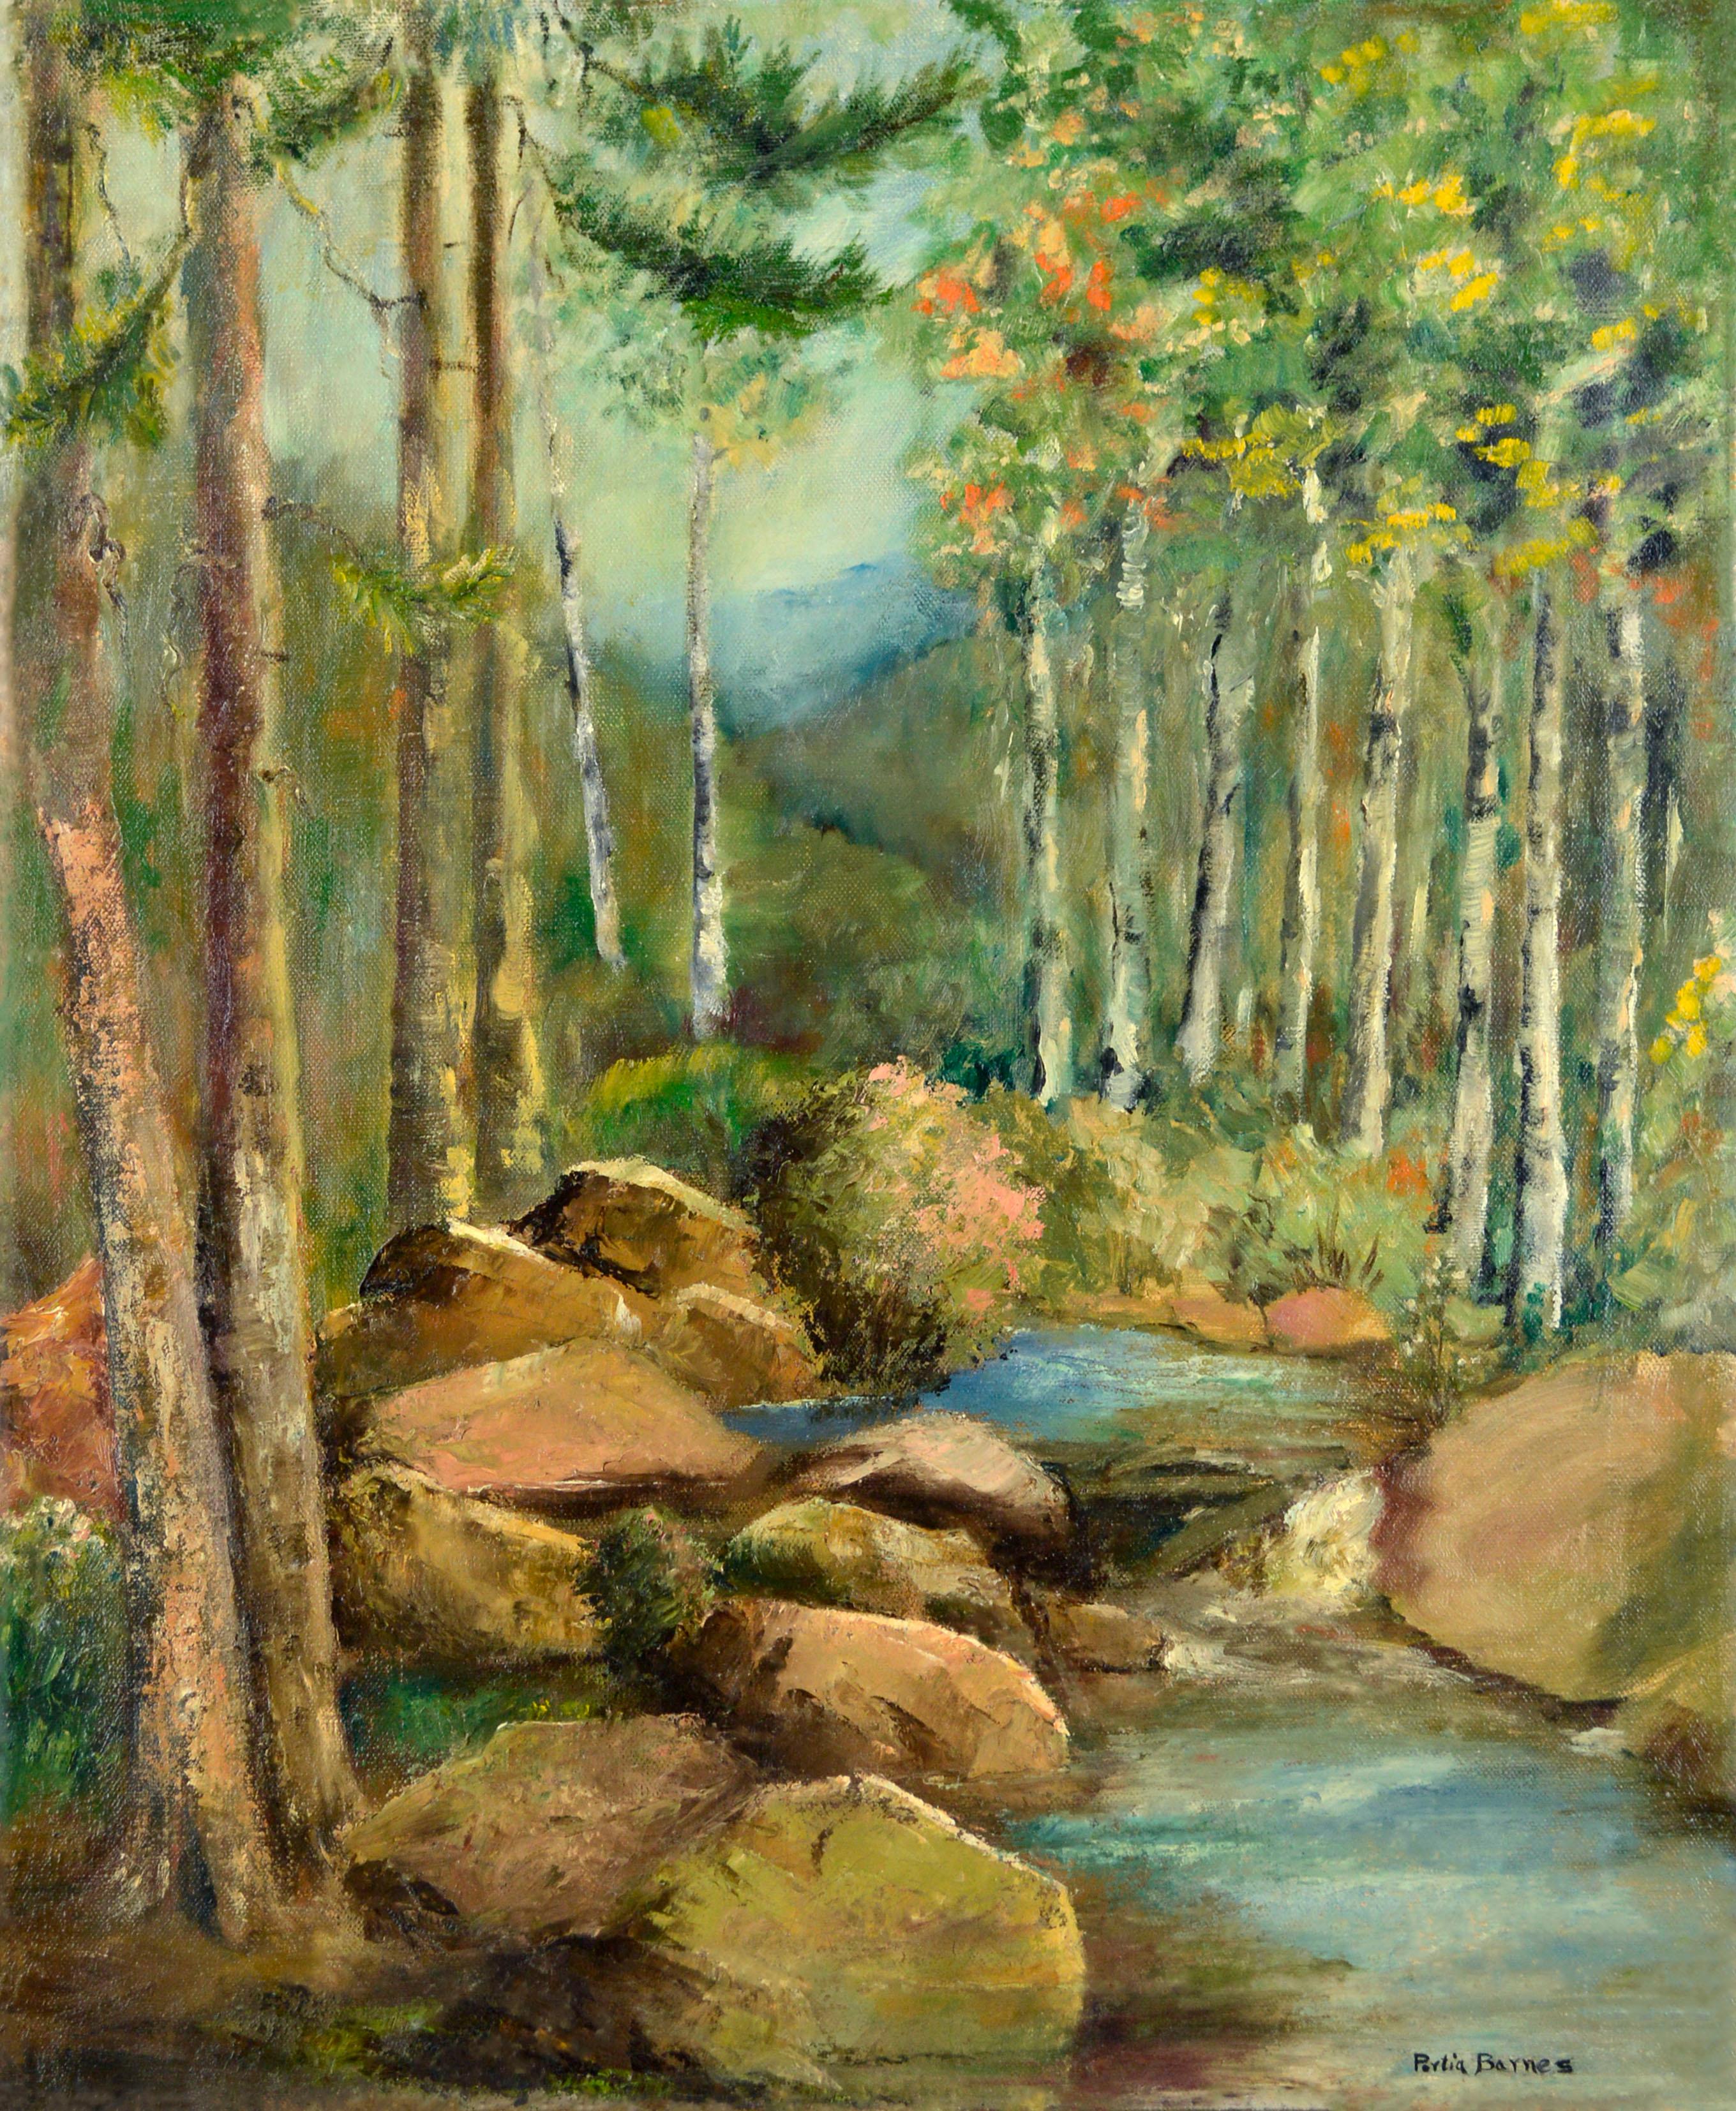 Portia Barnes Landscape Painting - Mid Century Forest Stream Landscape with Birch Trees and Boulders 